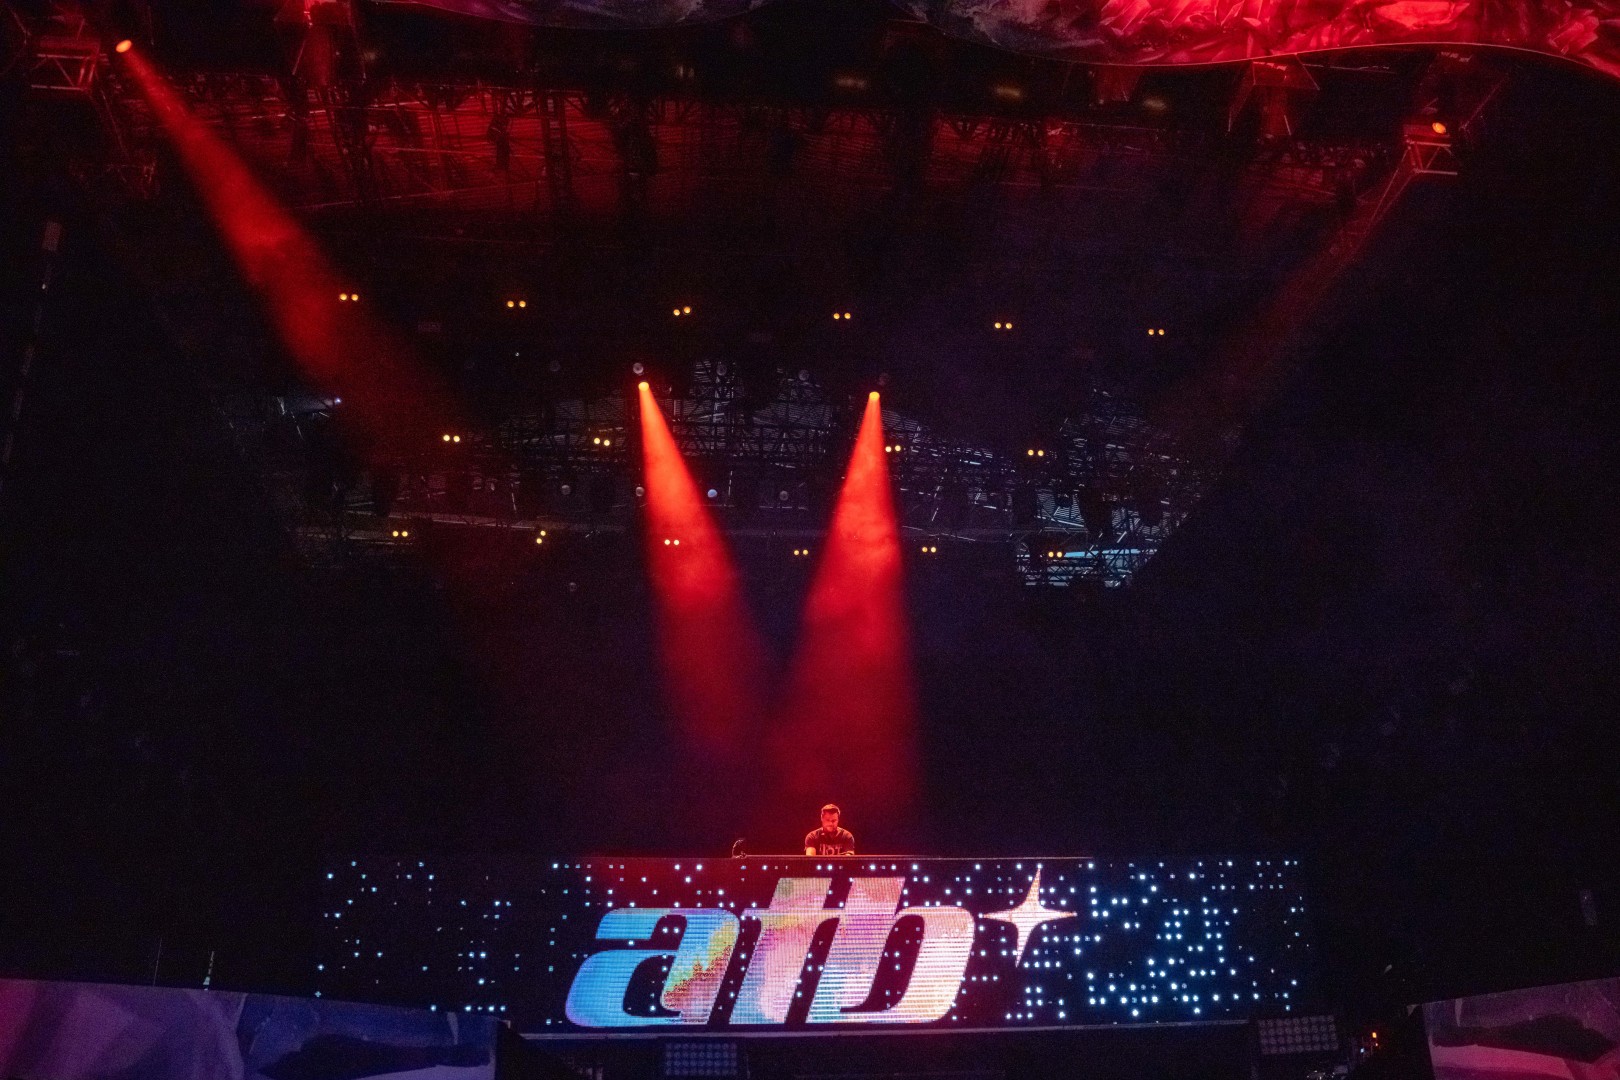 ATB at Cluj Arena in Cluj-Napoca on August 8, 2022 (e384846856)